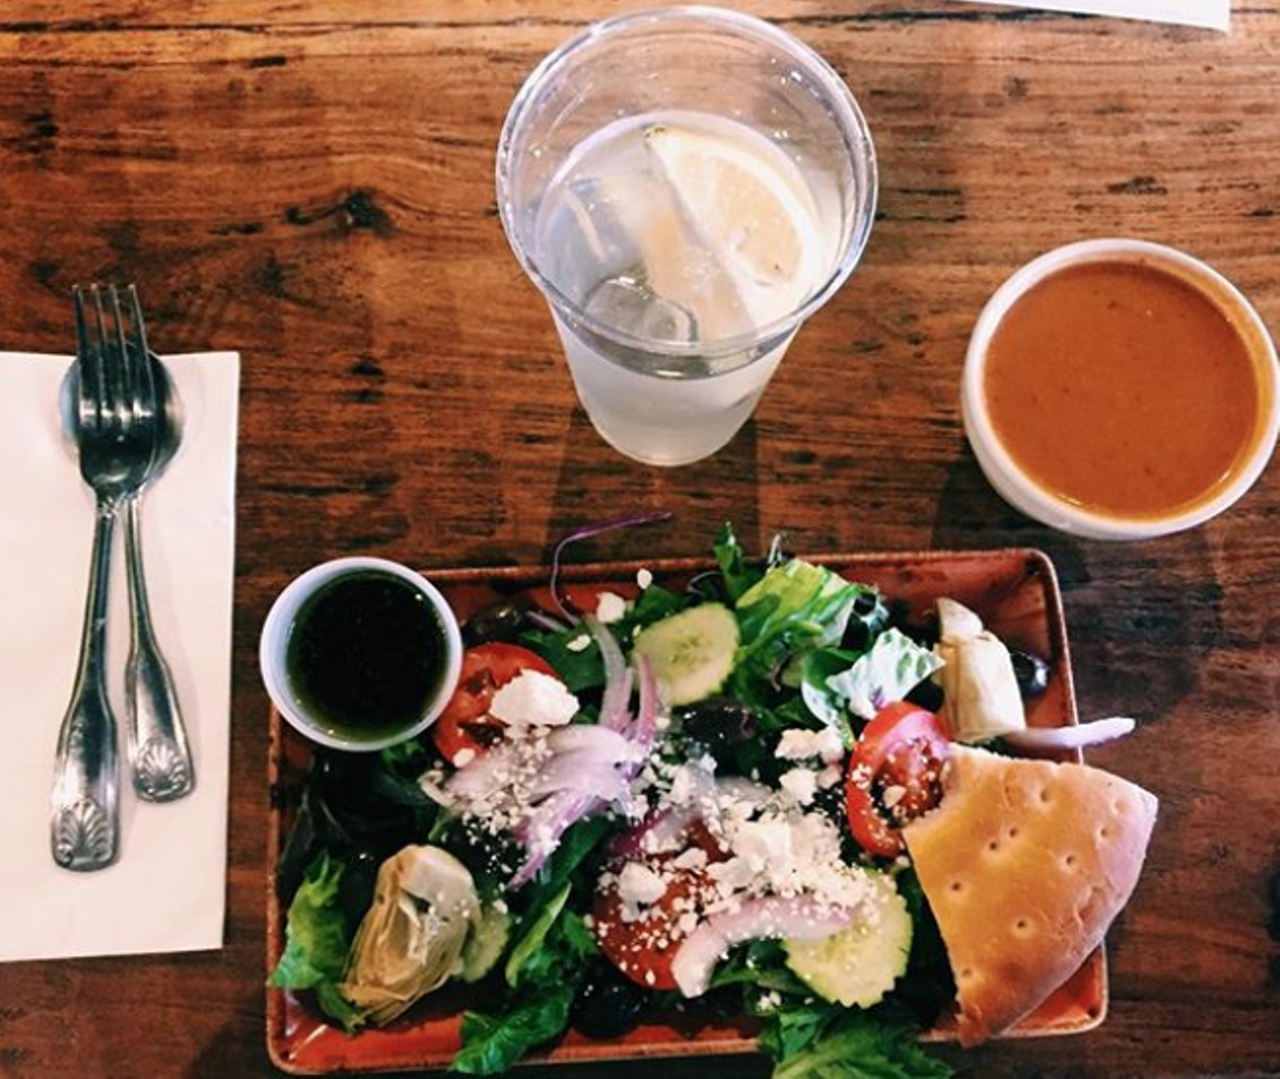 Pam’s Patio
11826 Wurzbach Road, (210) 492-1359, pamspatio.com
Sometimes you just want a really no-fuss salad. Pam’s Patio Kitchen will feature choice of select half sandwiches or half salads and cup of soup with choice of homemade cupcakes.
Photo via Instagram / mcyungvegan